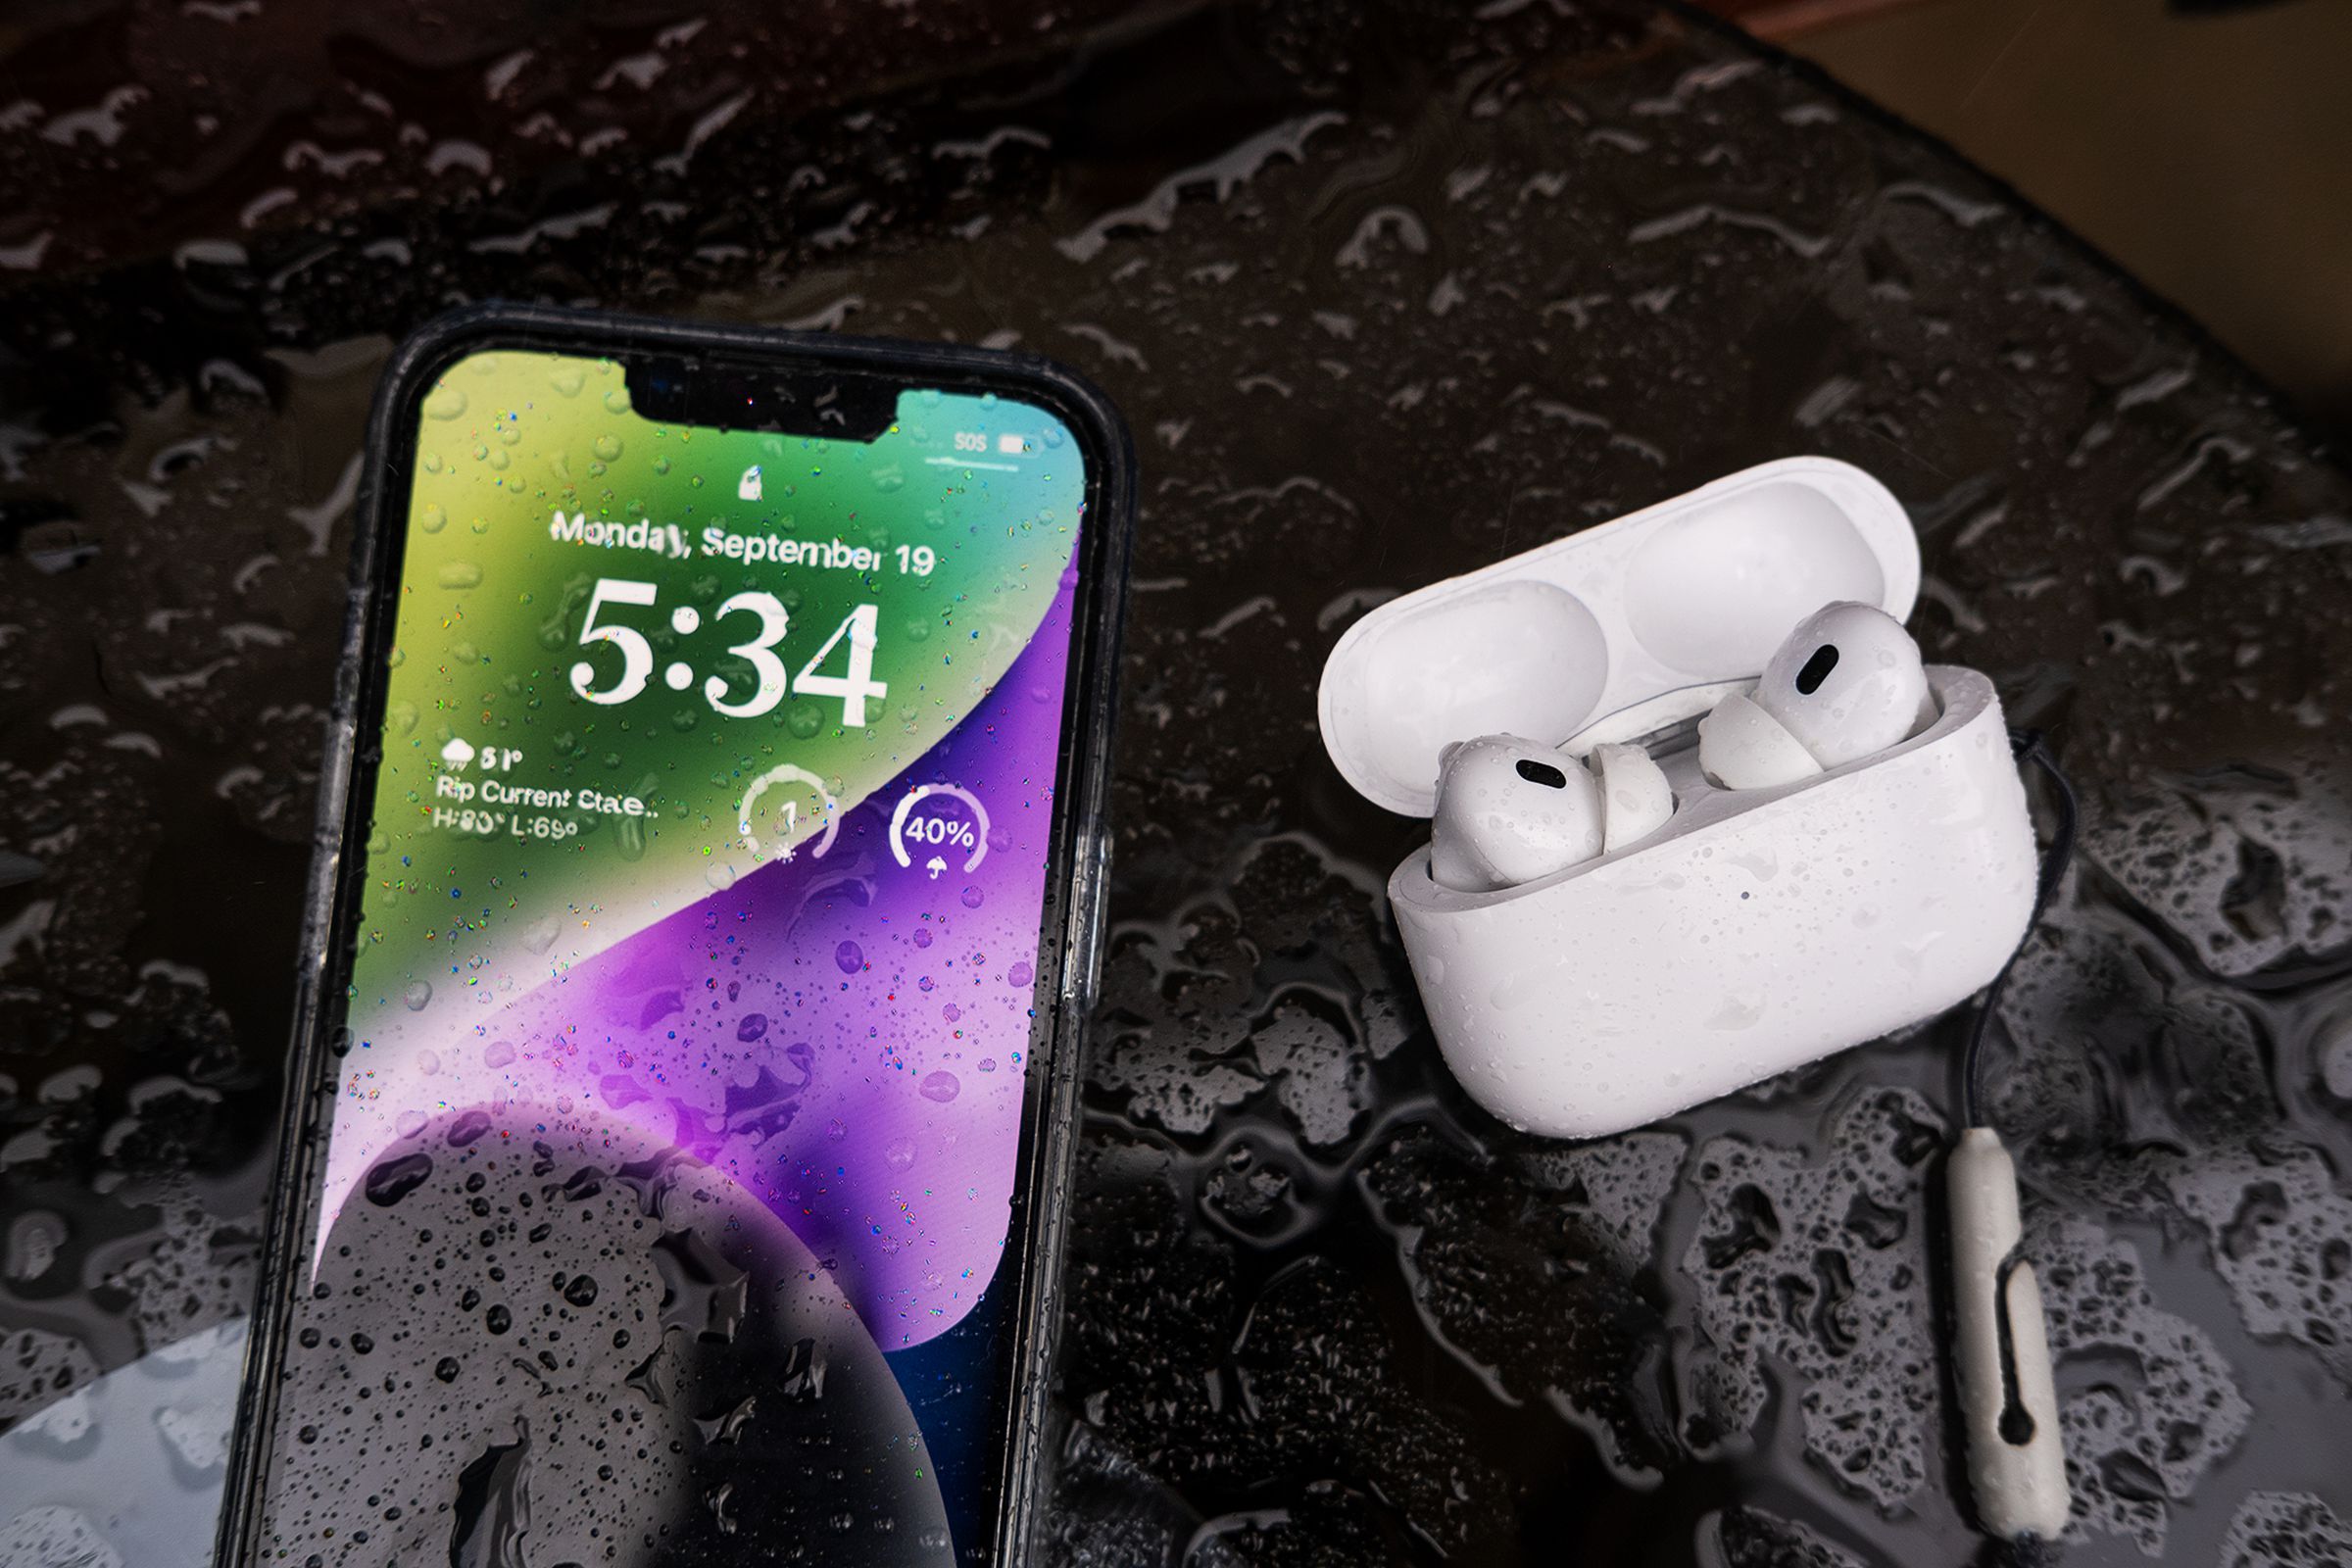 A photo of the iPhone 14 next to Apple’s second-generation AirPods Pro. Both devices are wet with visible rain drops on them.